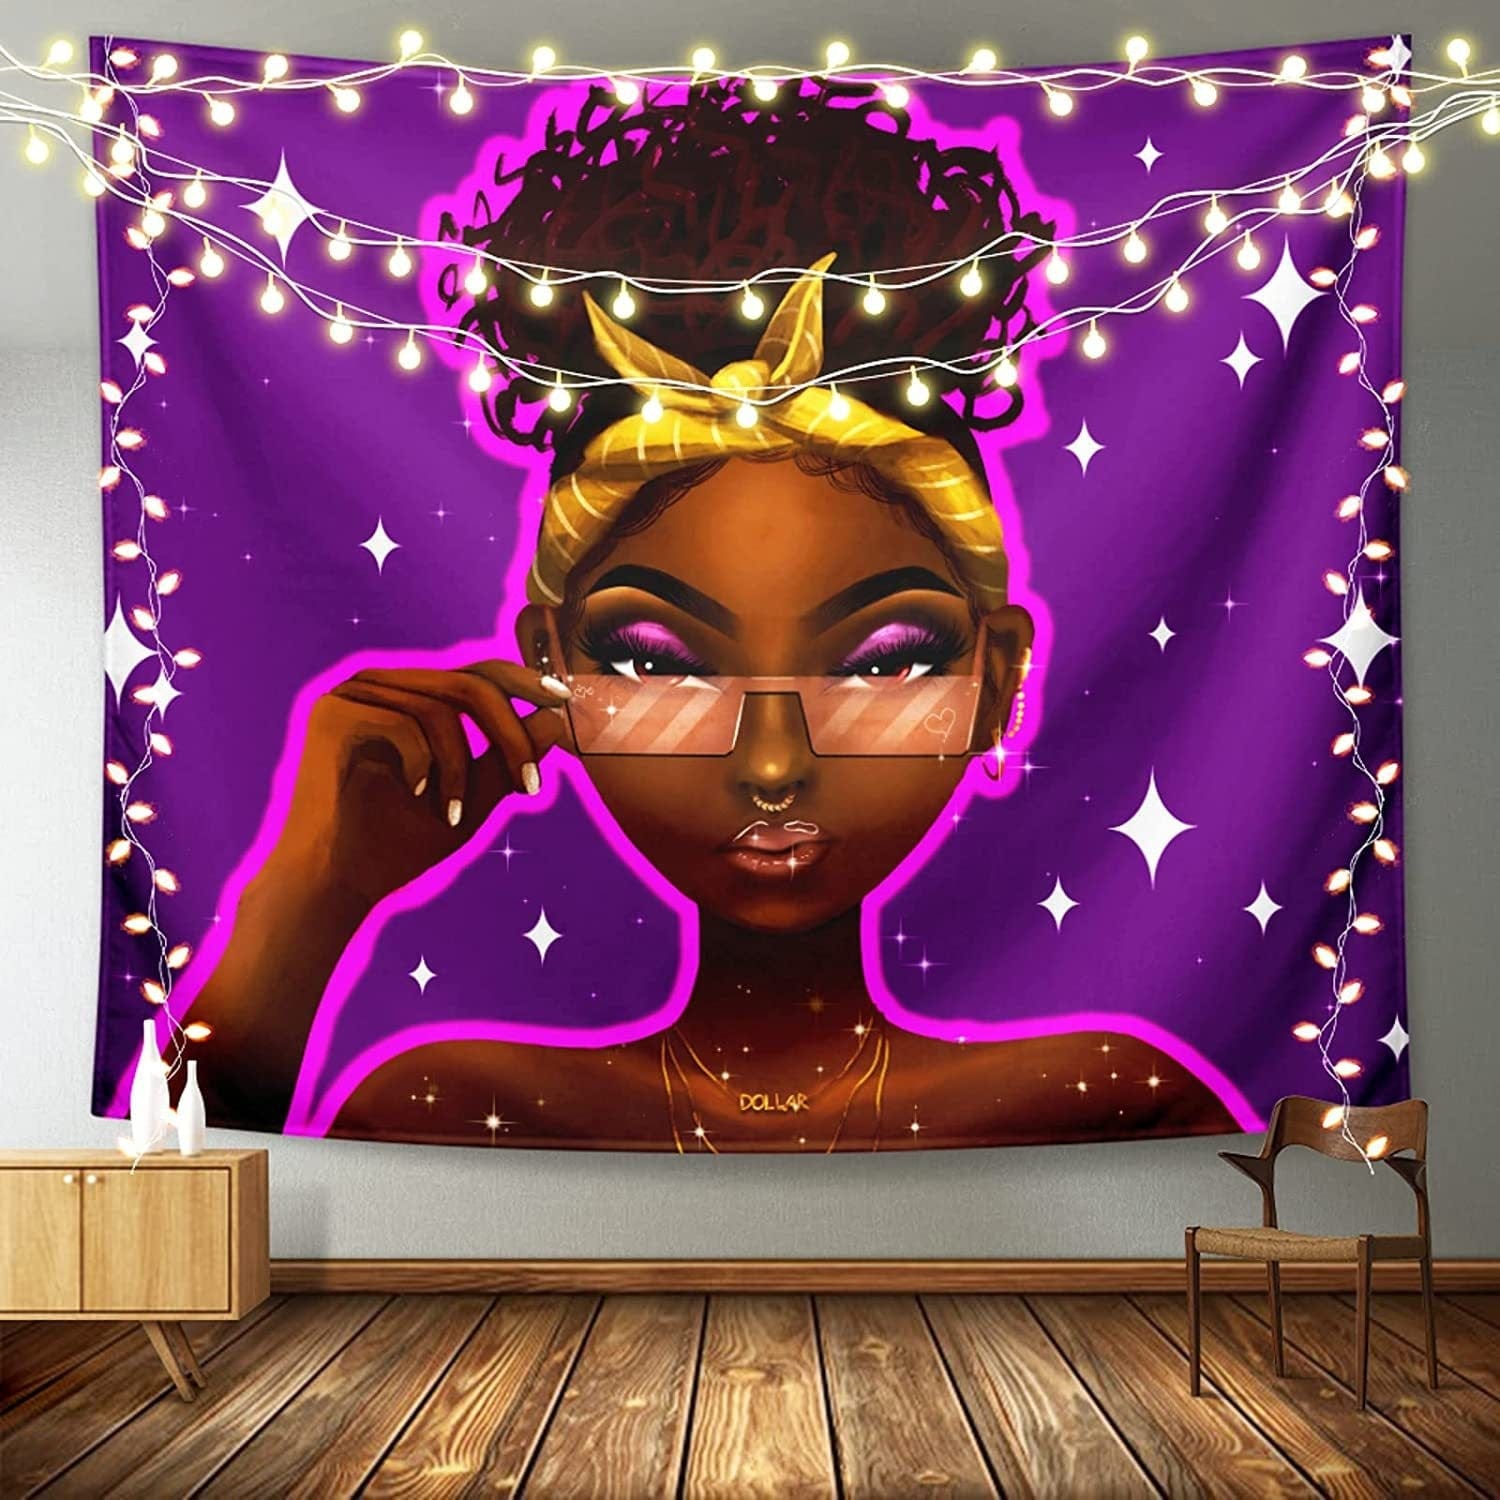 Tapestry Home Bohemian Tapestry Room Decoration African Women Cloth Decorative Cloth Tapestry - CLASSY CLOSET BOUTIQUETapestry Home Bohemian Tapestry Room Decoration African Women Cloth Decorative Cloth Tapestryeperlo5F2847DA4CE64321B20D462A7864735013148*200